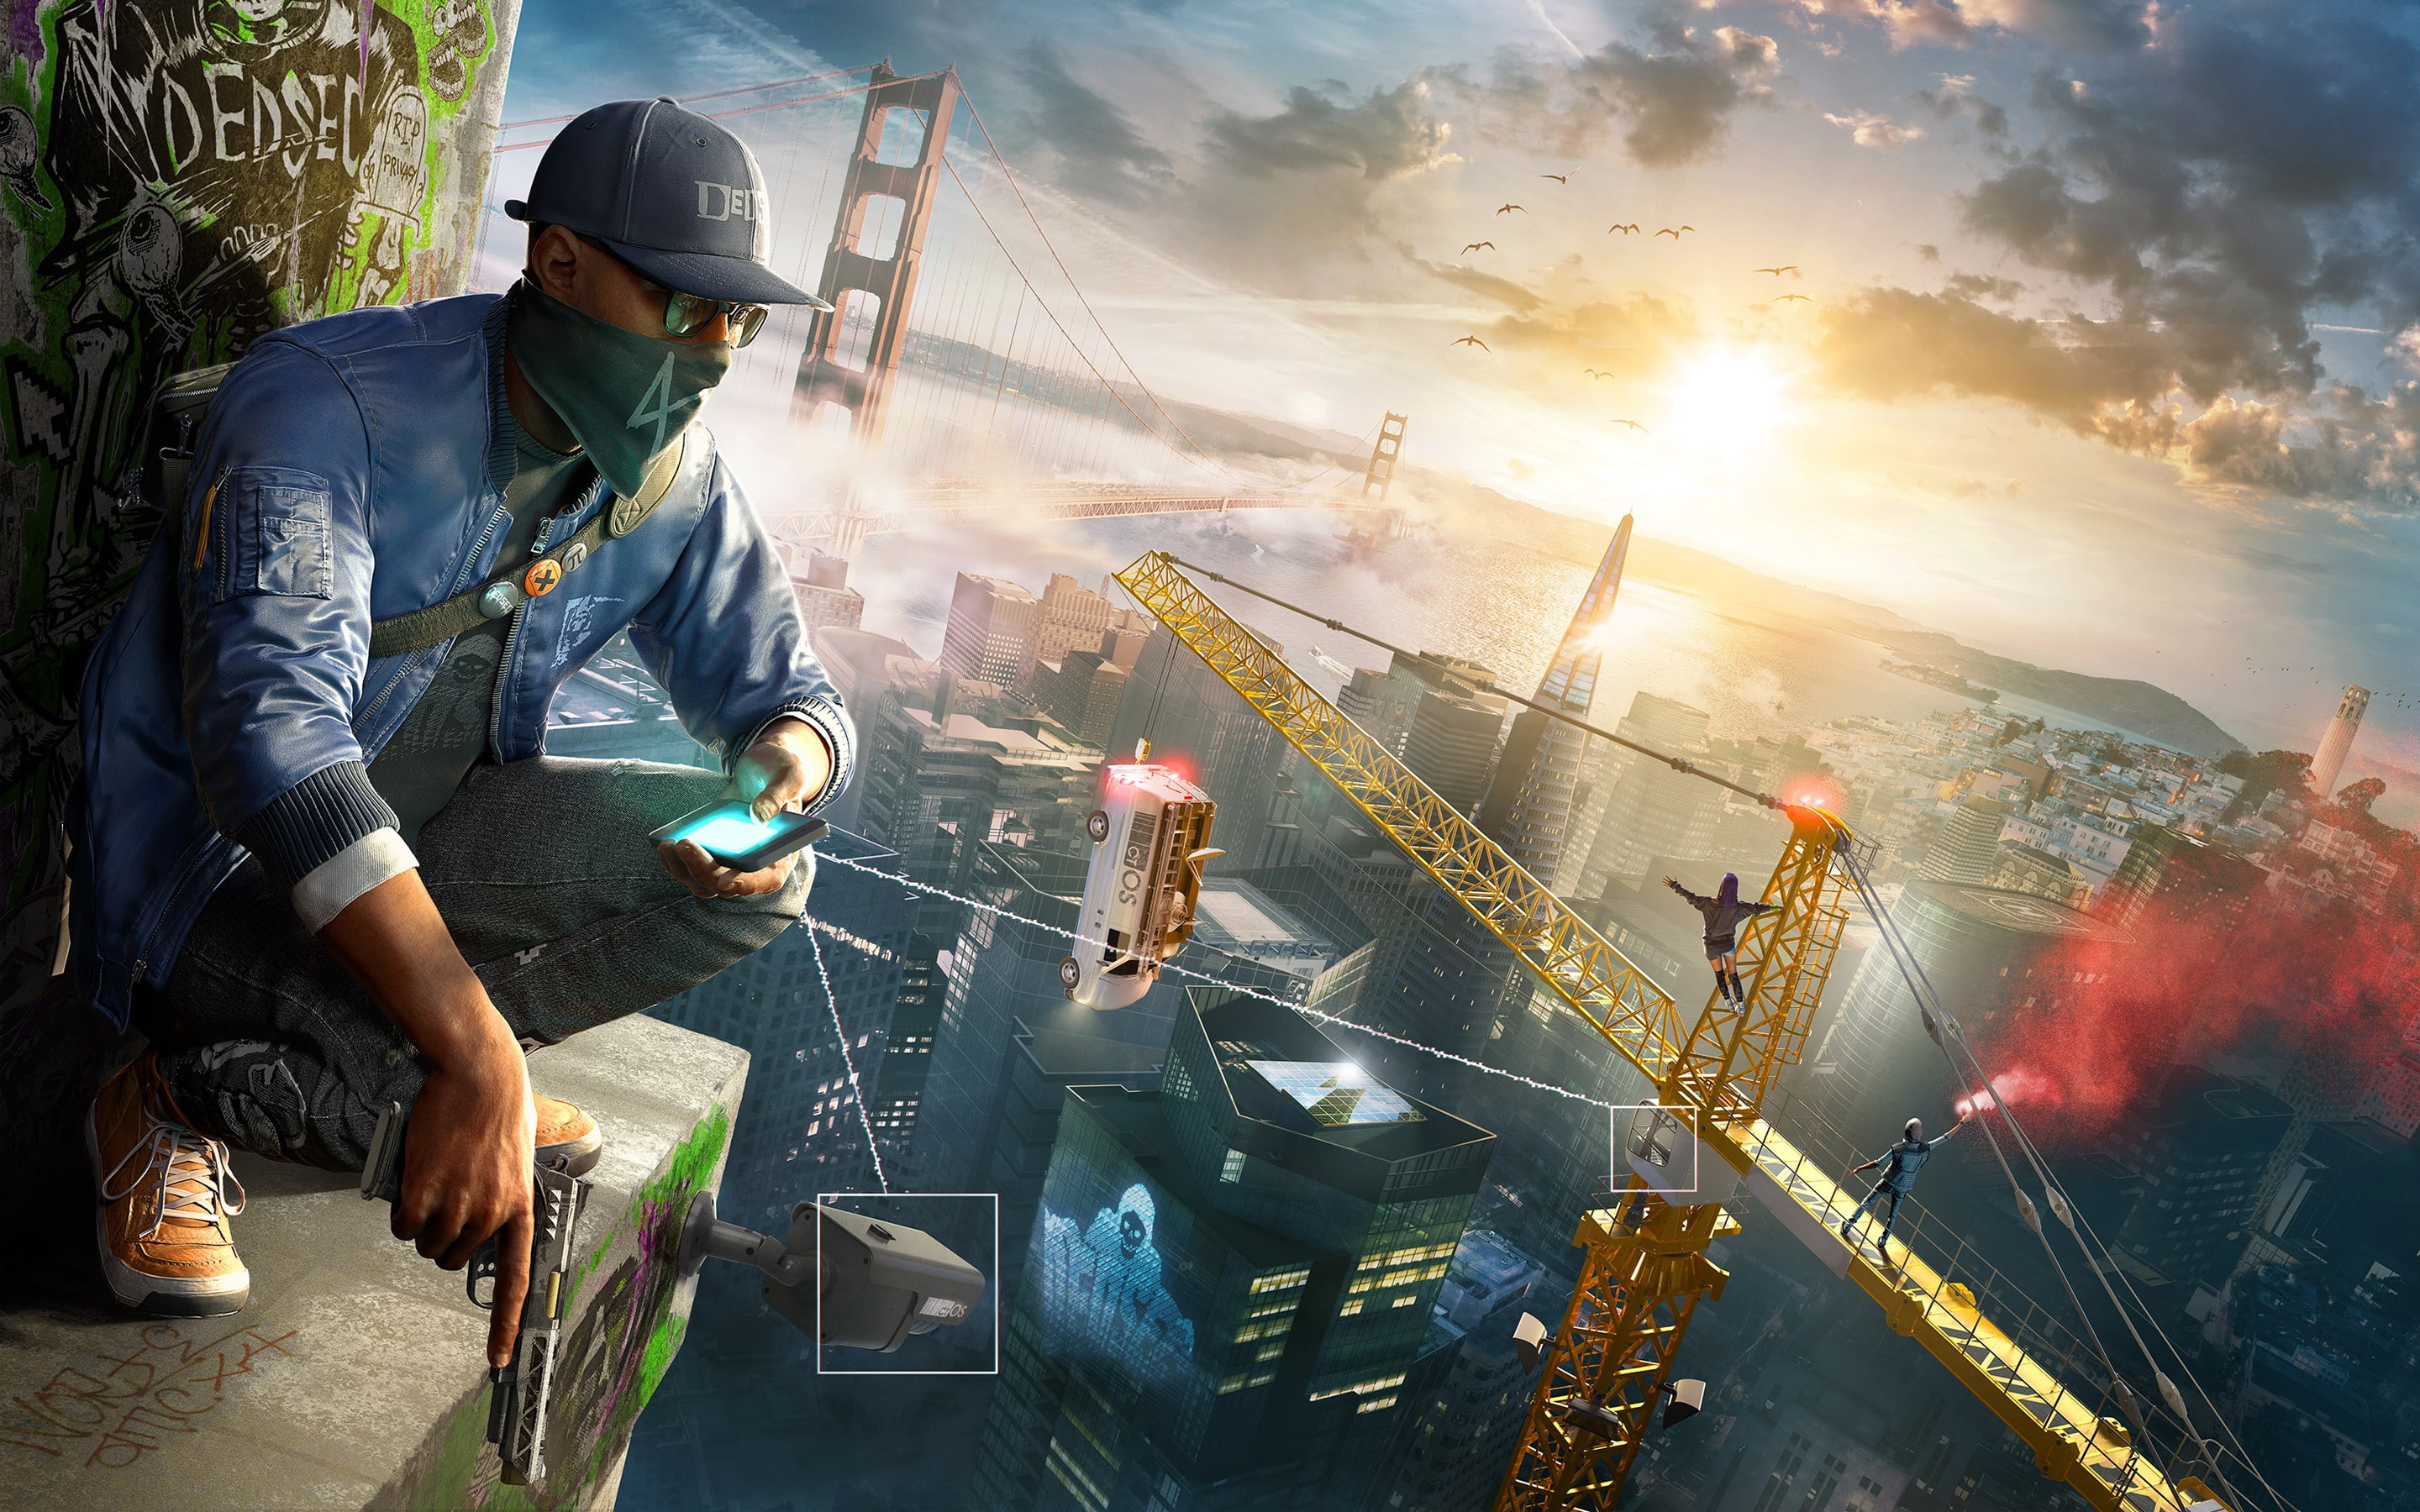 Watch_Dogs 2, video games, Ubisoft, Marcus Holloway